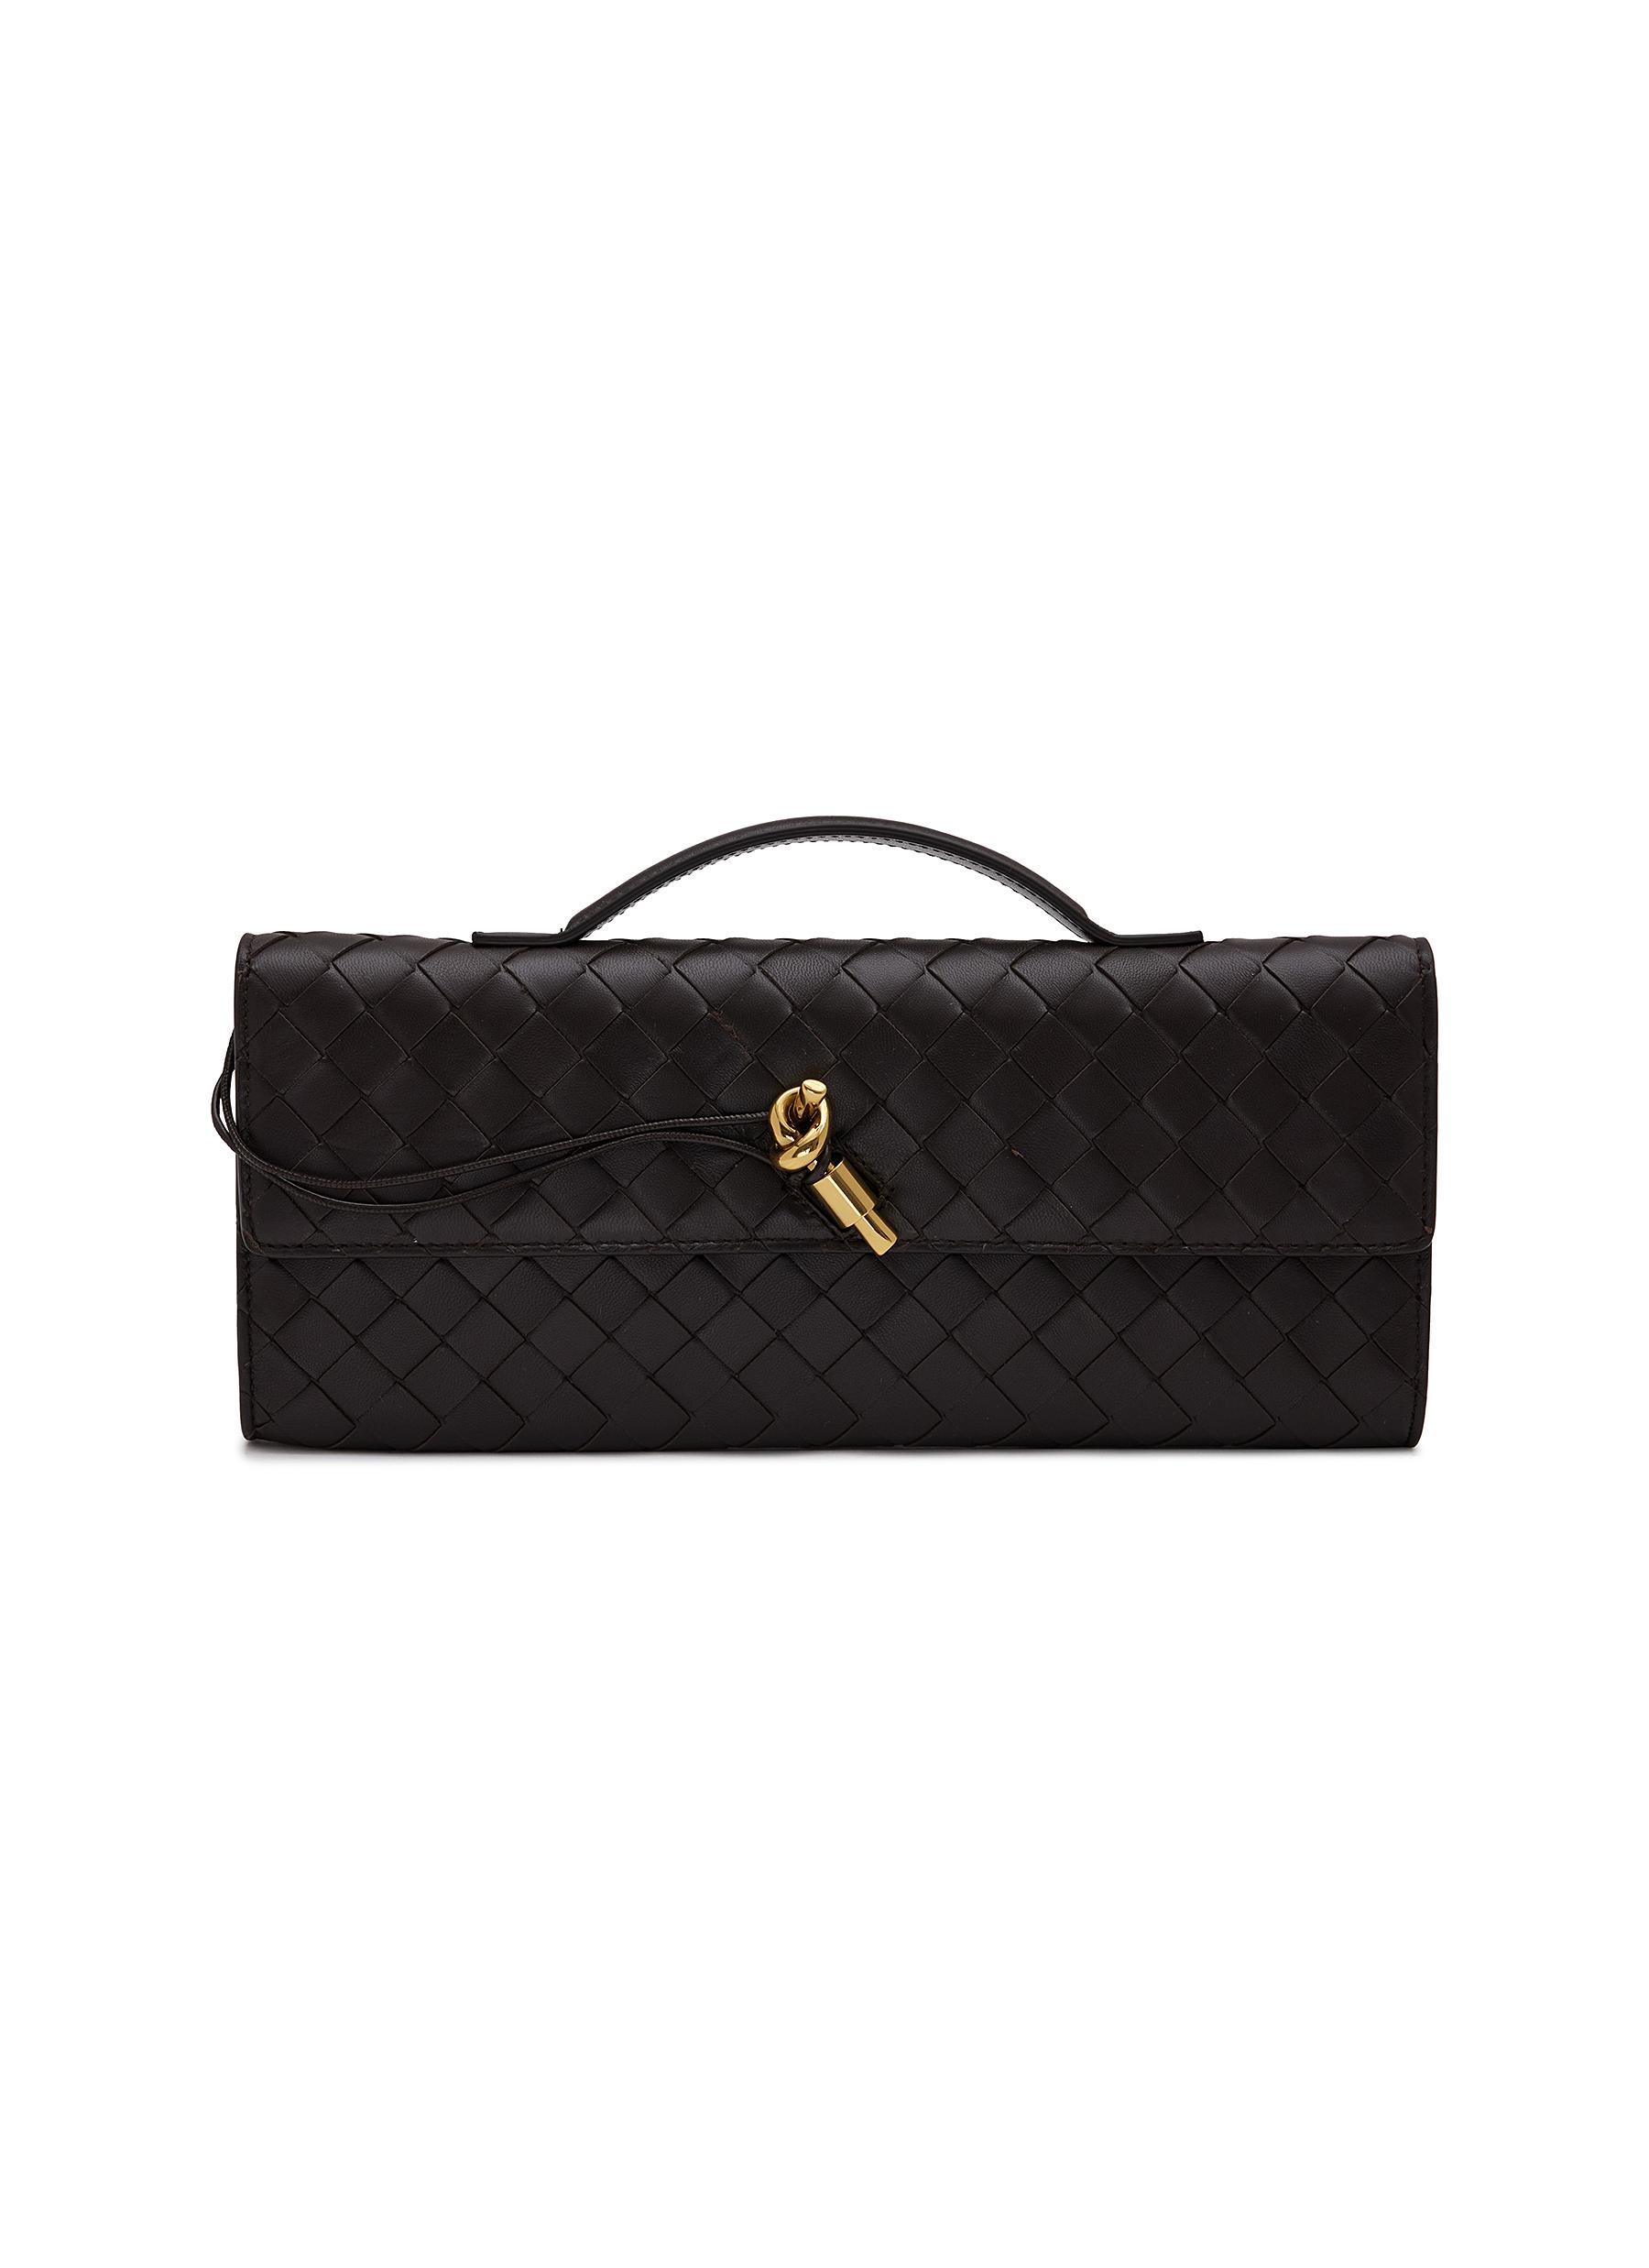 Knot Intrecciato 15 Leather Long Clutch